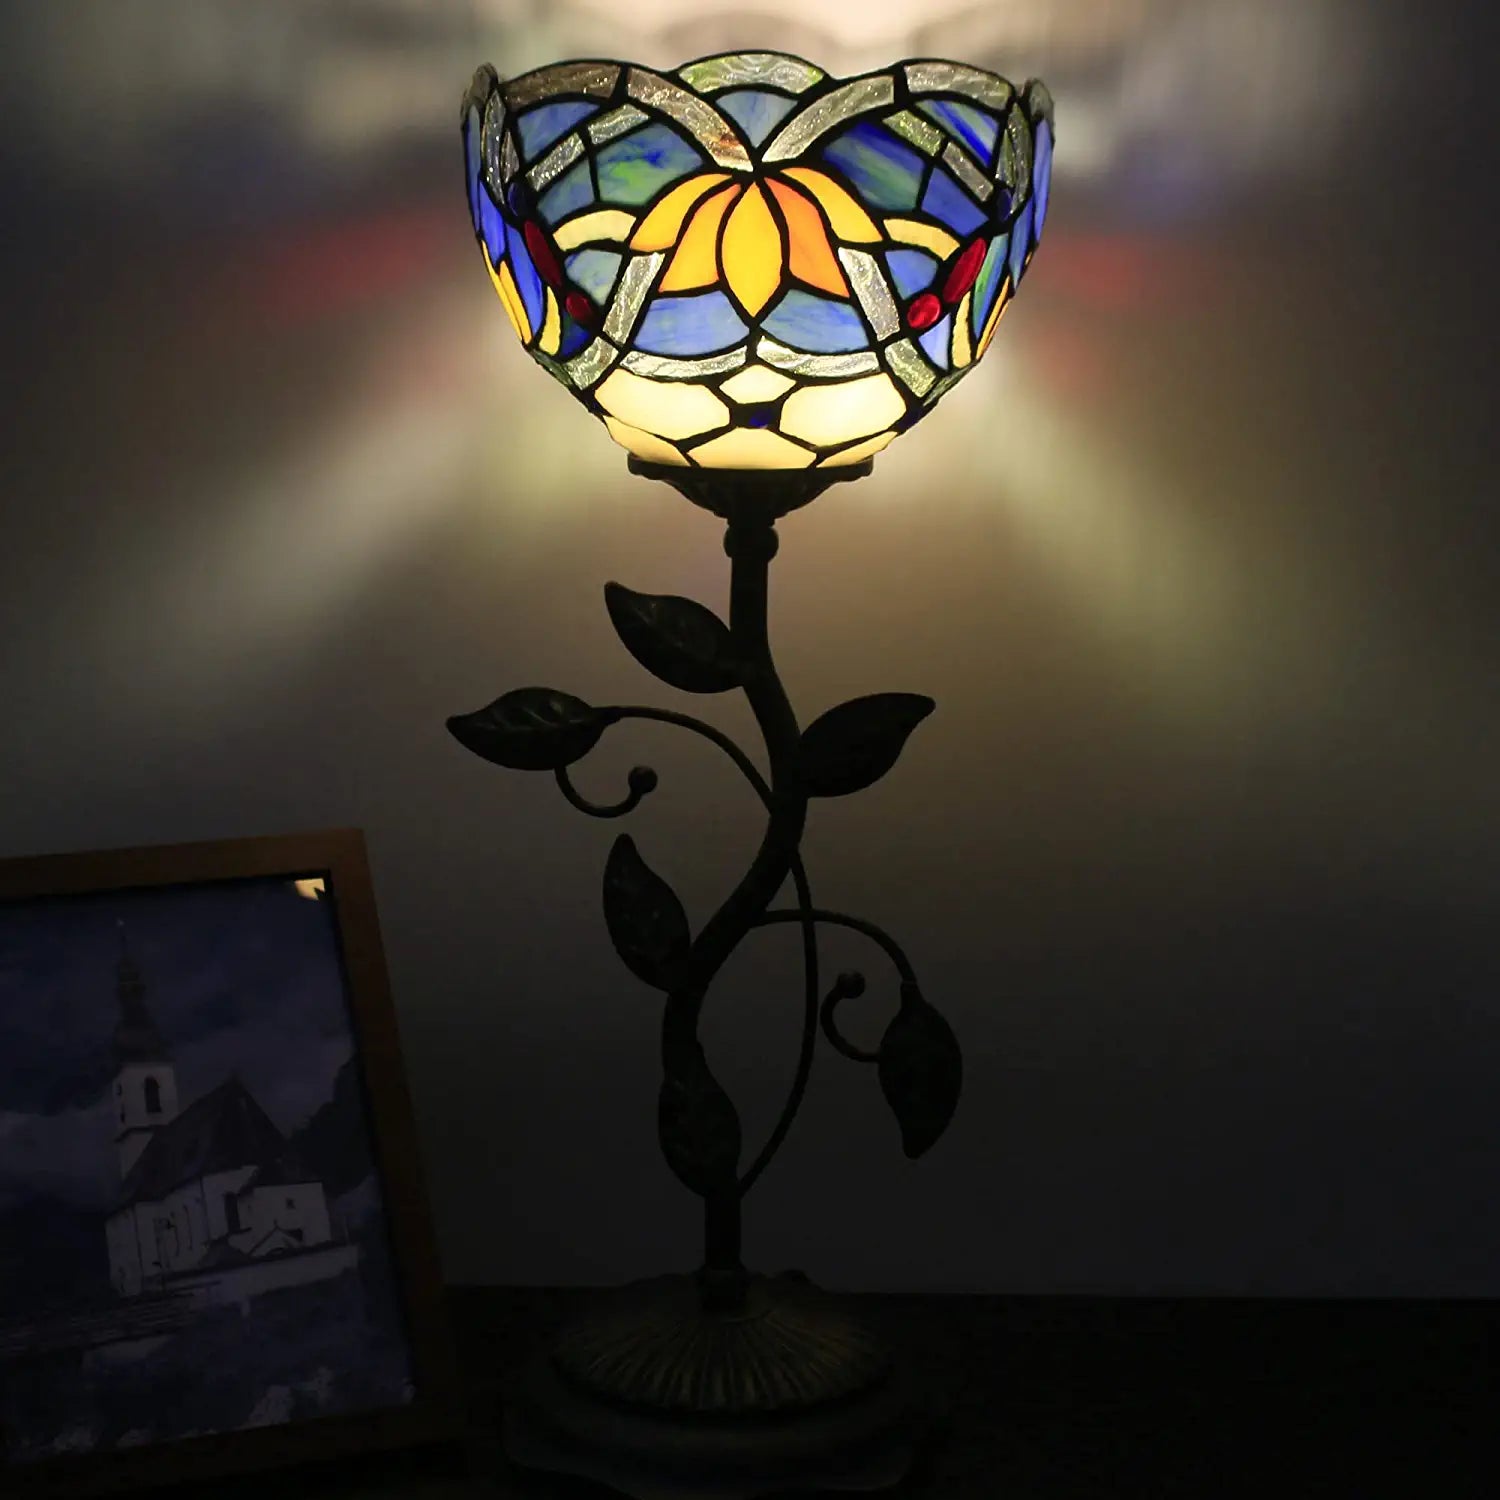 WERFACTORY Small Tiffany Table Lamp 8" Blue Stained Glass Lotus Style Shade 19" Tall Antique Vintage Metal Leaf Base Mini Bedside Accent Desk Torchiere Uplight